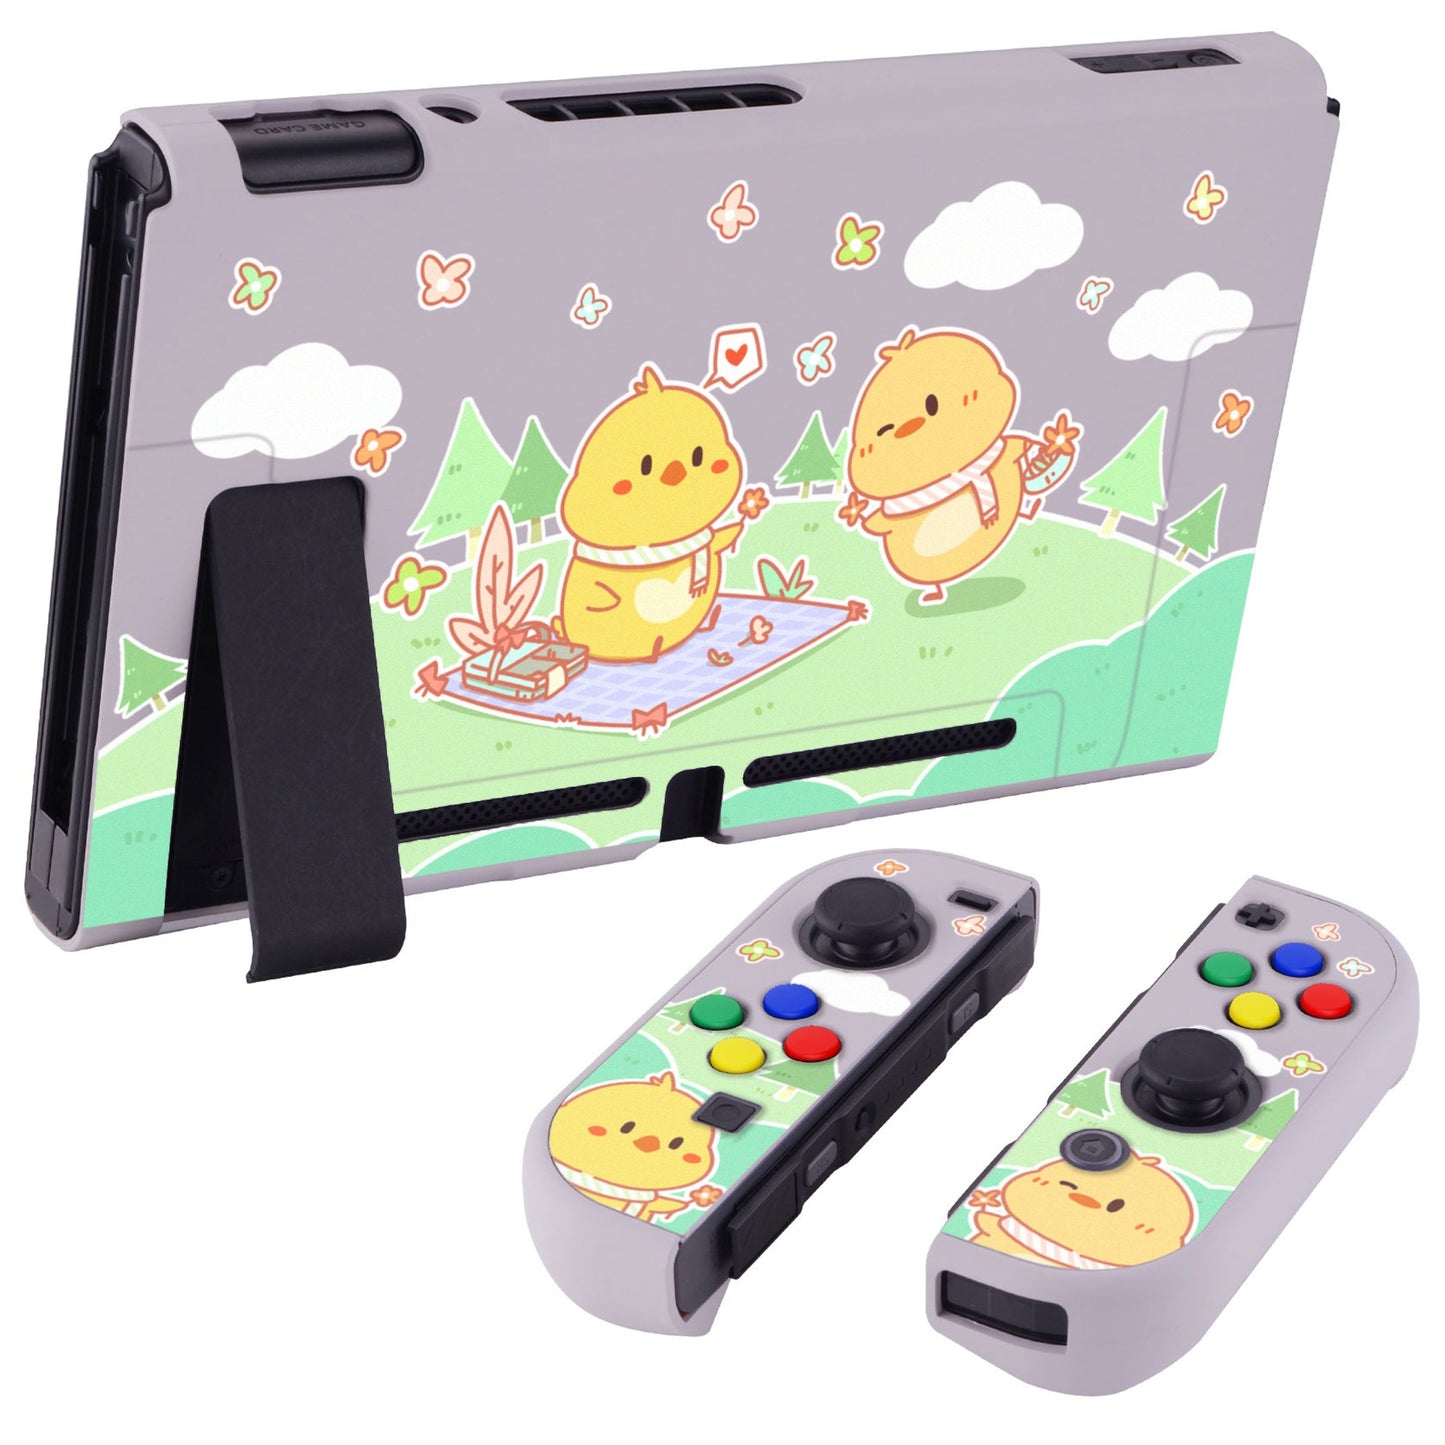 PlayVital Picnic Fair Back Cover for NS Switch Console, NS Joycon Handheld Controller Separable Protector Hard Shell, Dockable Protective Case with Colorful ABXY Direction Button Caps - NTT119 PlayVital